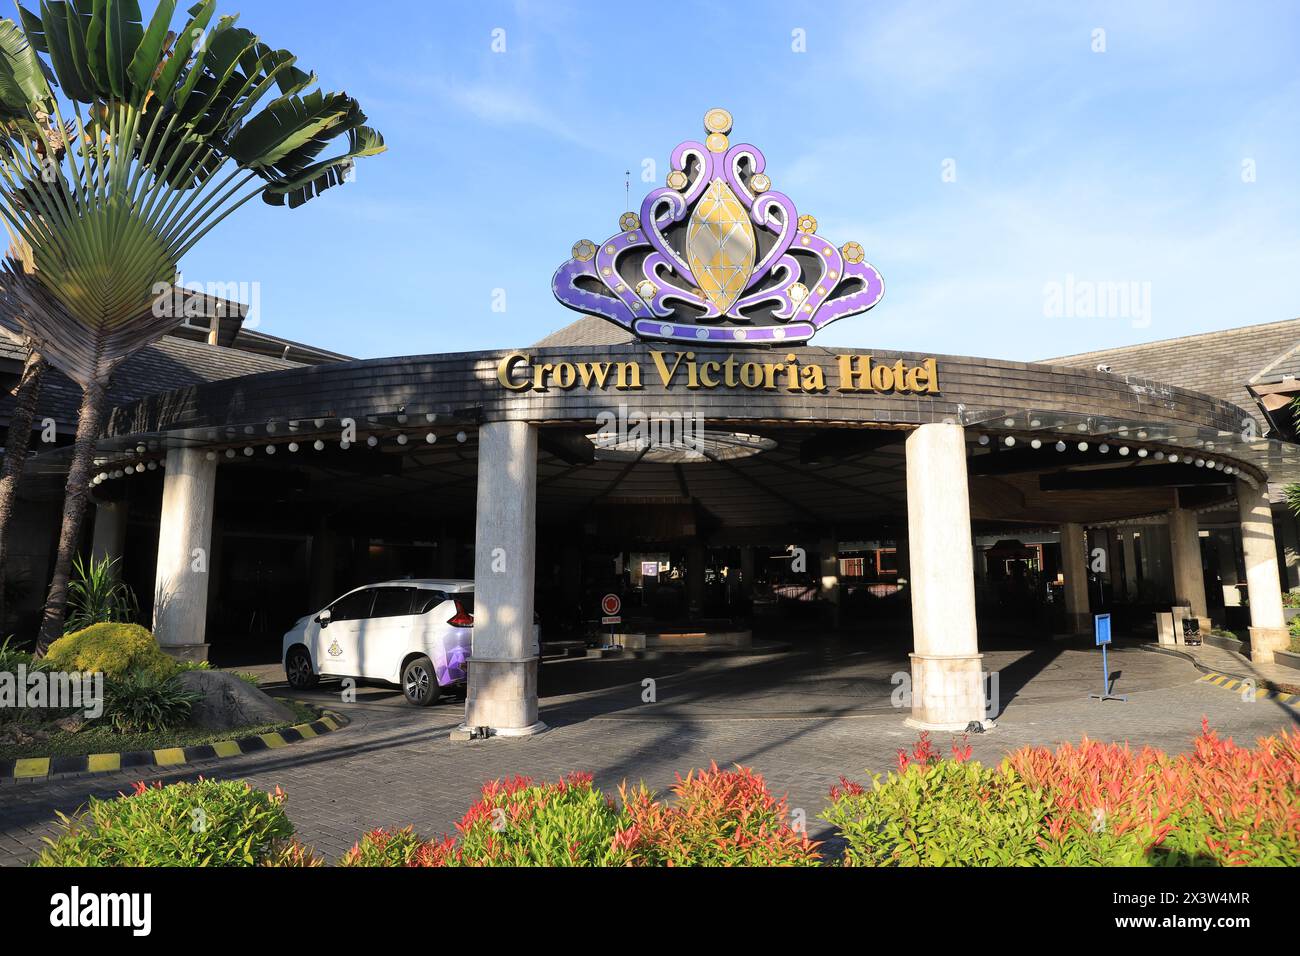 Crown Victoria Hotel at East Java Stock Photo